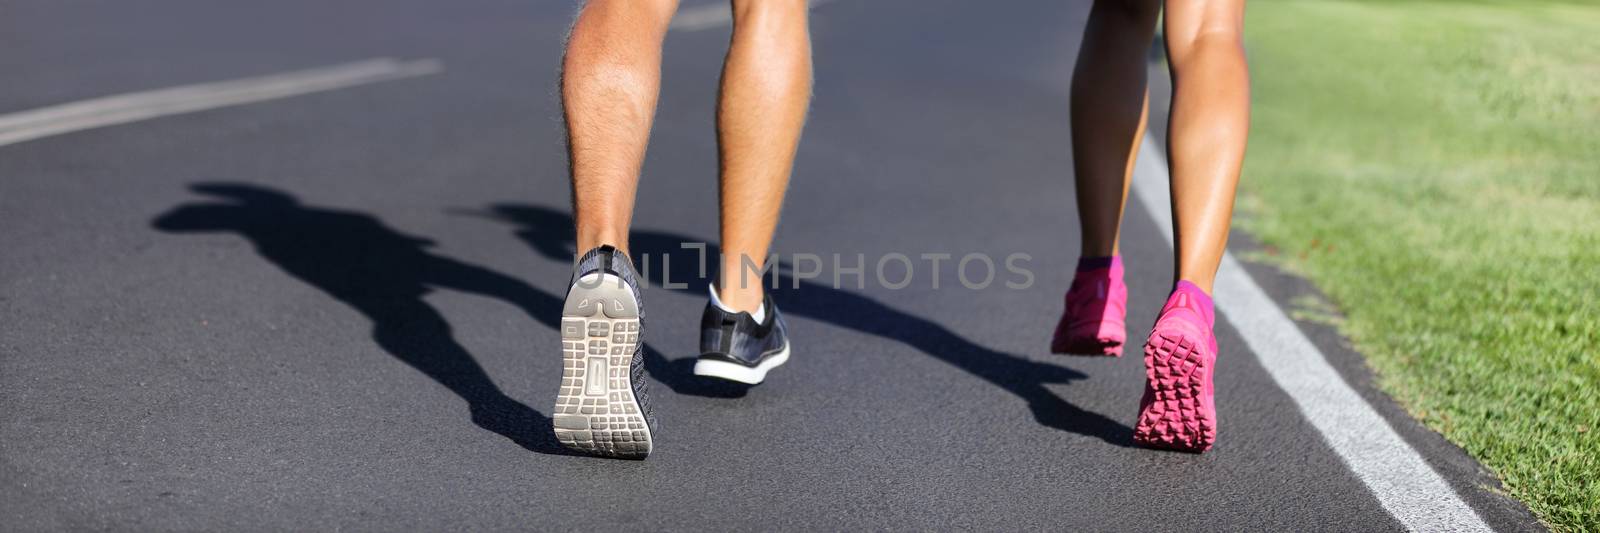 Fitness runners running road to weight loss banner - couple of young people jogging together - crop of legs and running shoes.